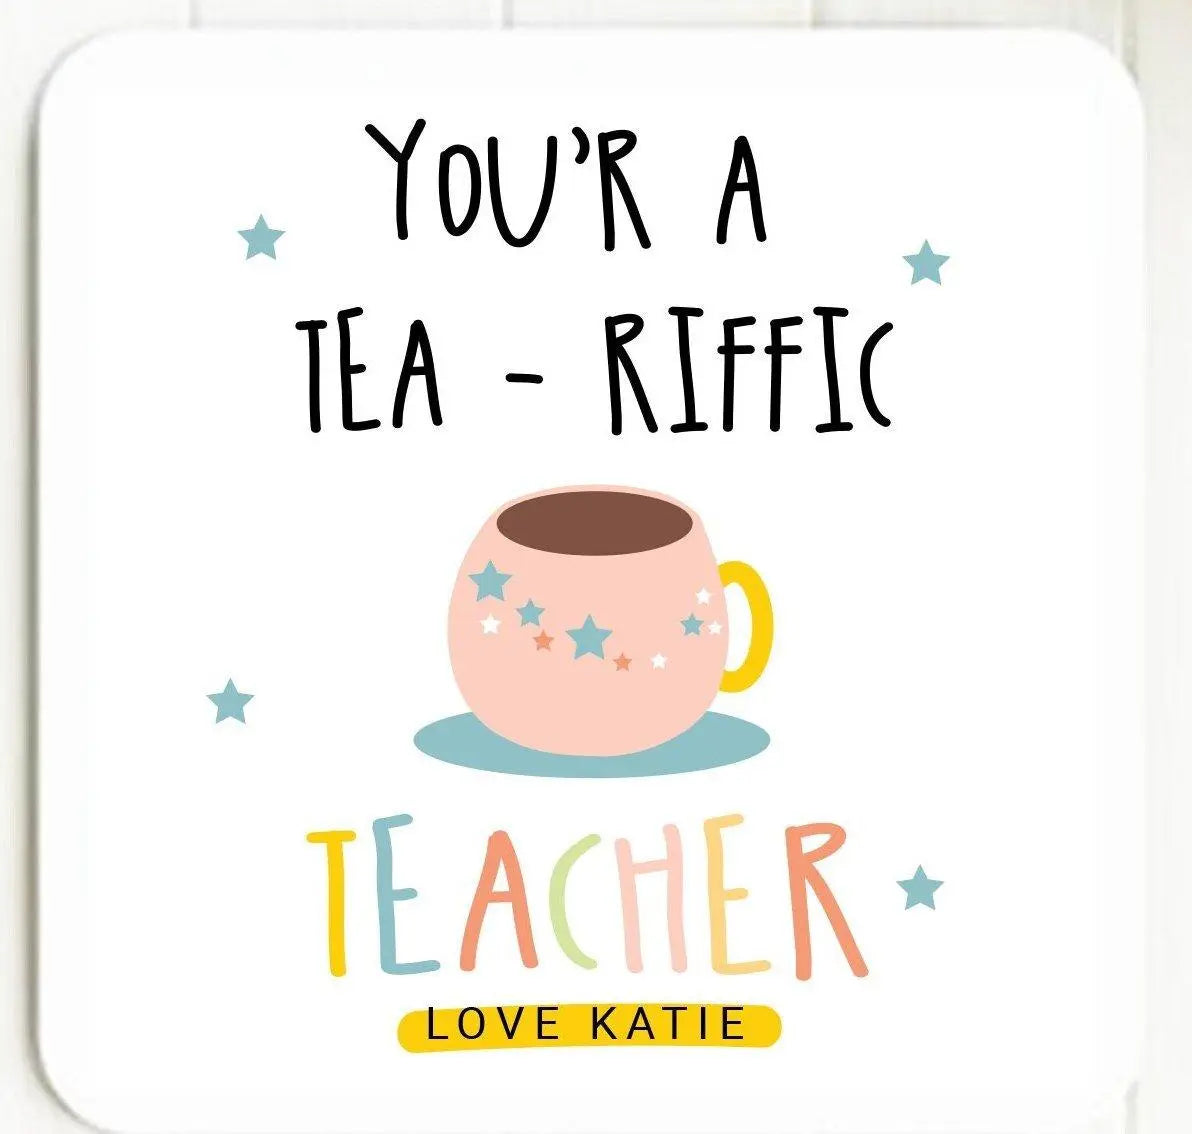 Personalised Tea- Riffic Teacher Coaster, Appreciation Teacher Gift, Teacher Gifts, Personalised Tea Gift, Teaching Assistant - Amy Lucy